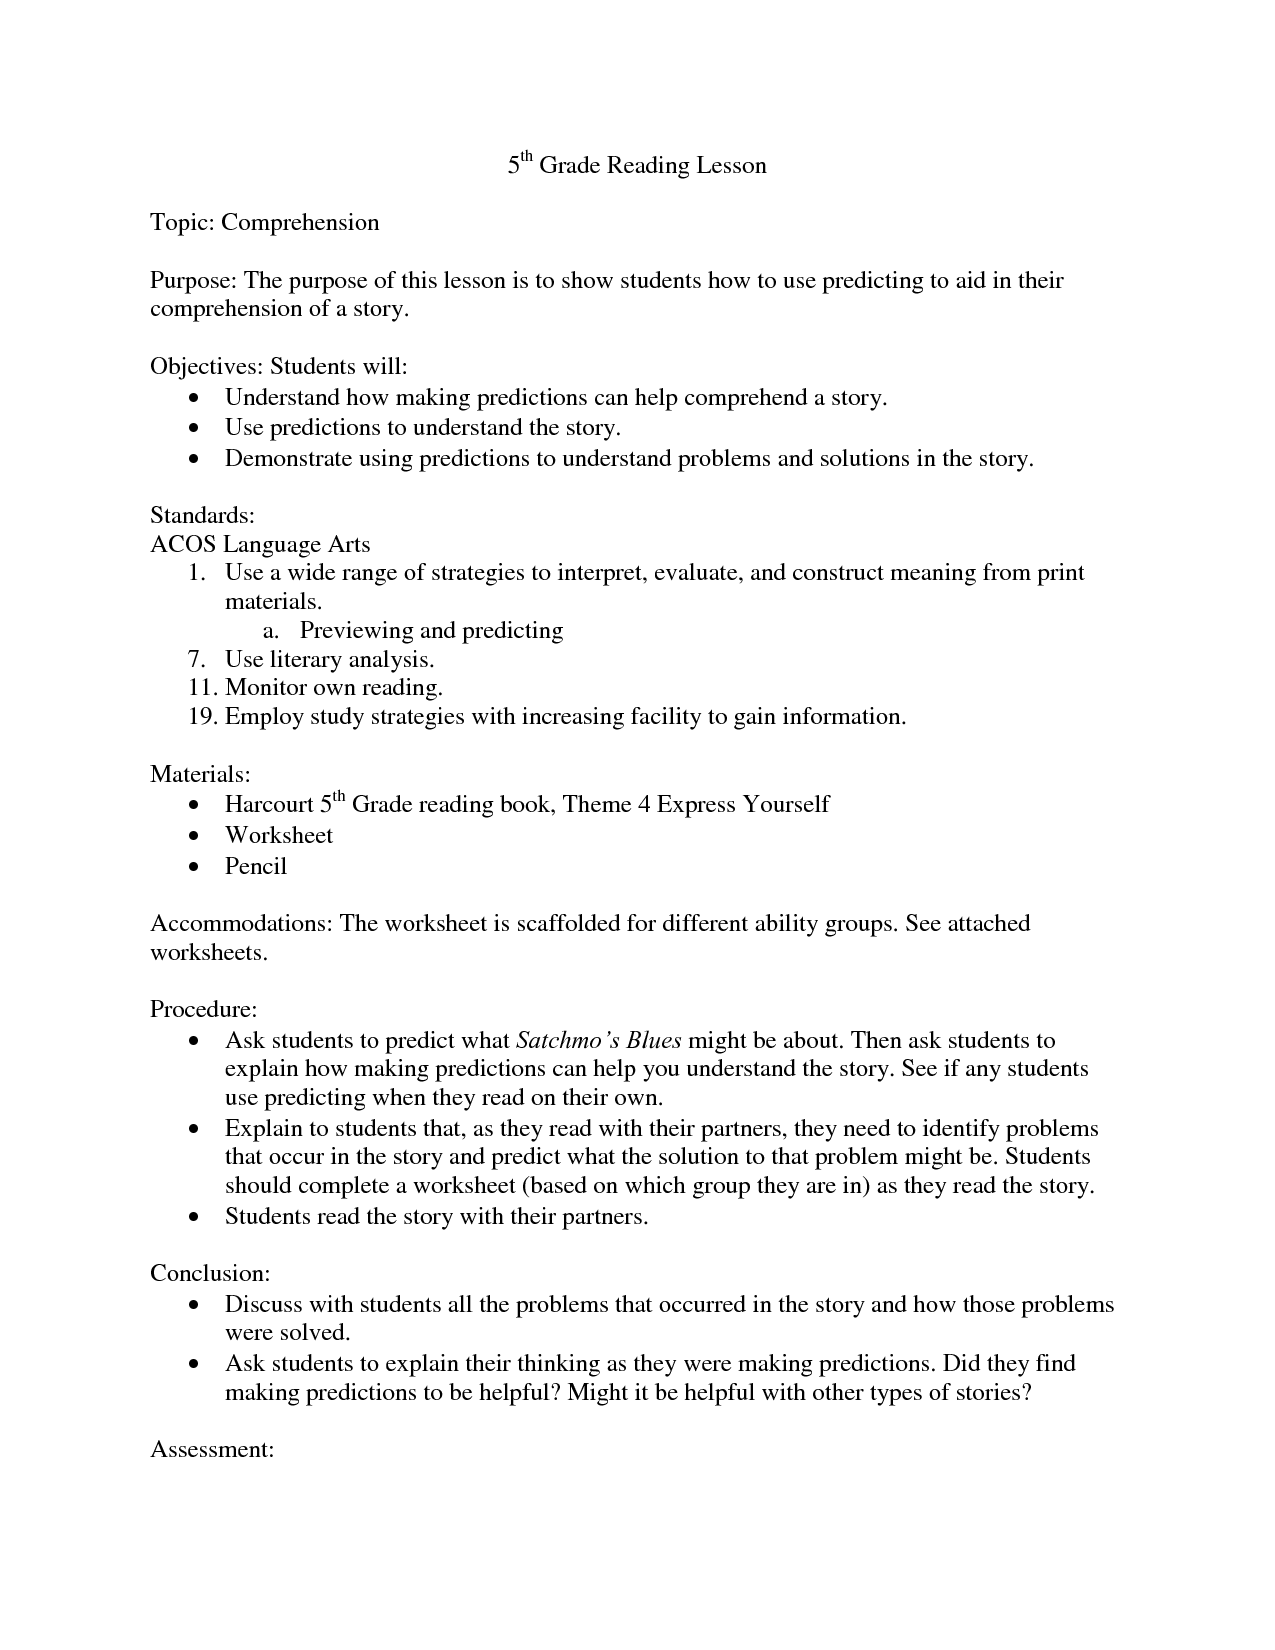 17-best-images-of-fifth-grade-grammar-worksheets-5th-grade-english